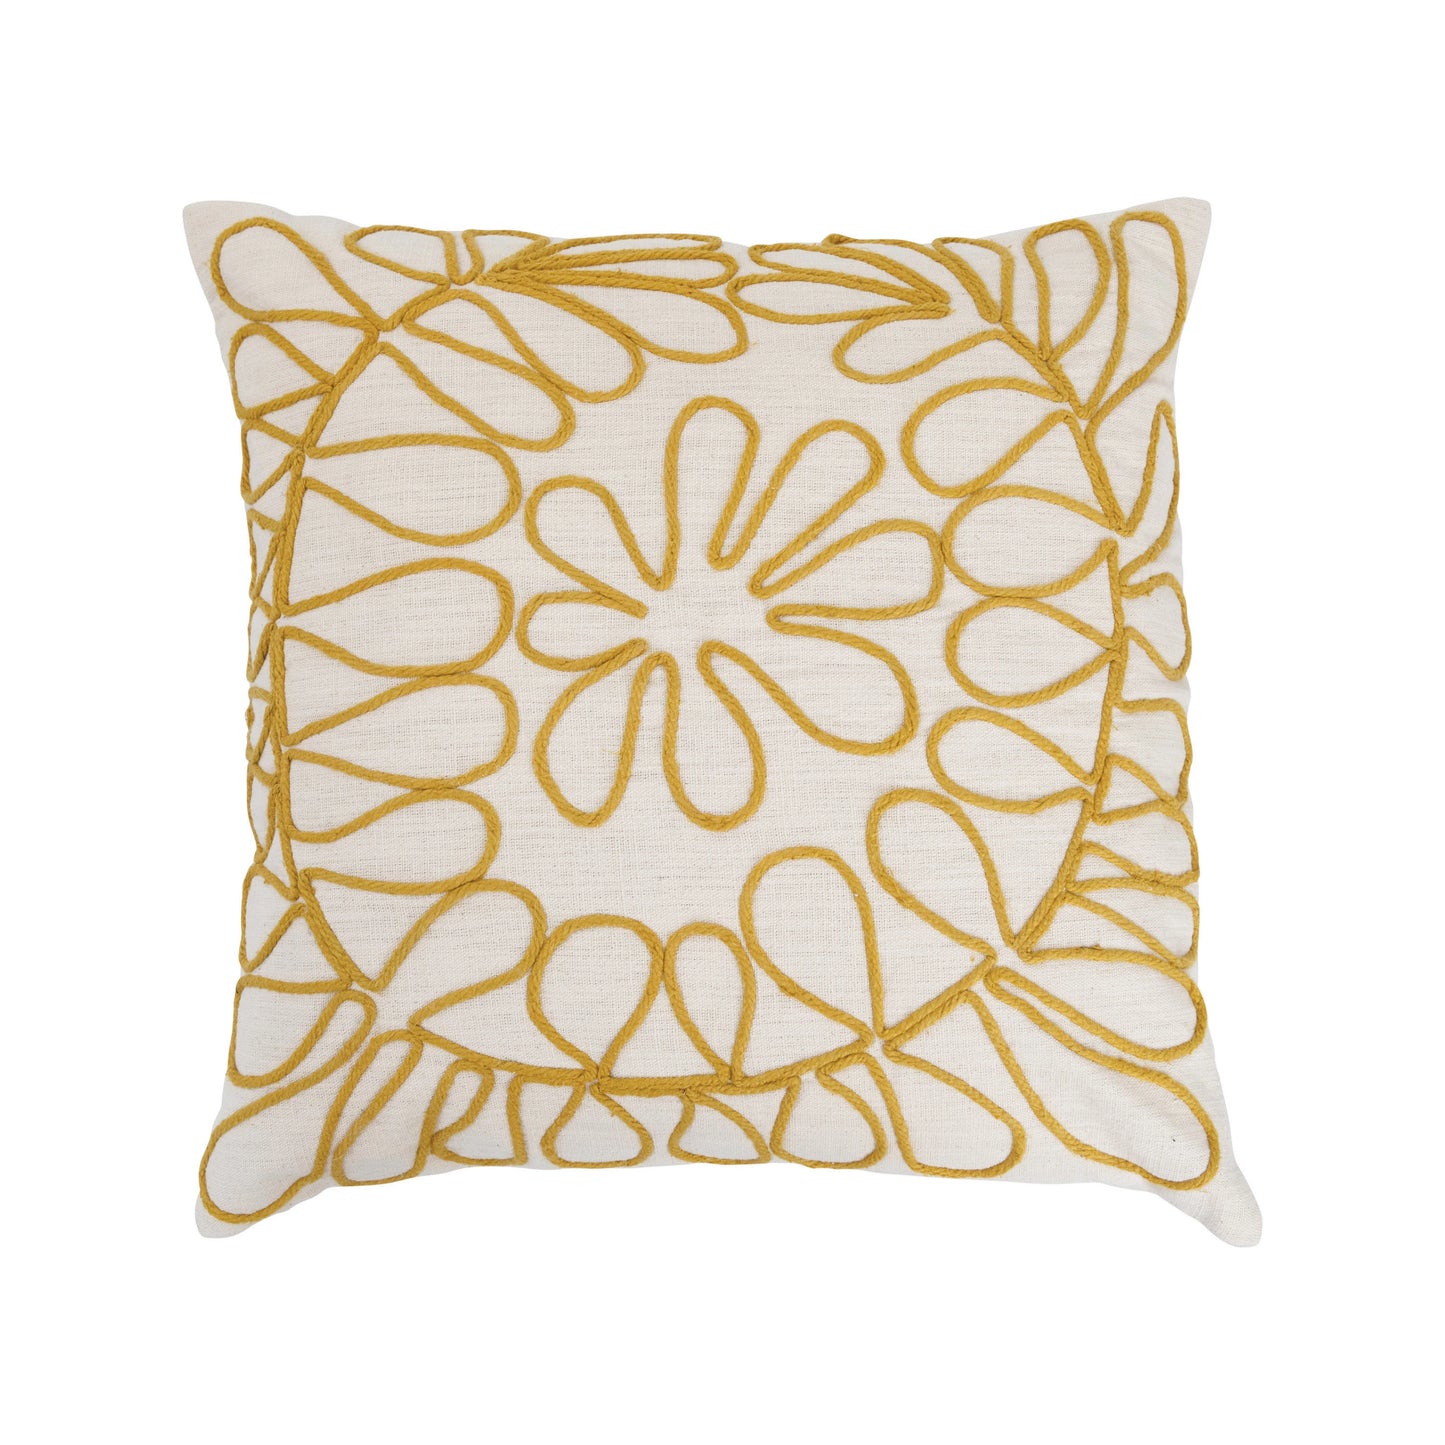 cream with dark gold embroidered pillow displayed against a white background